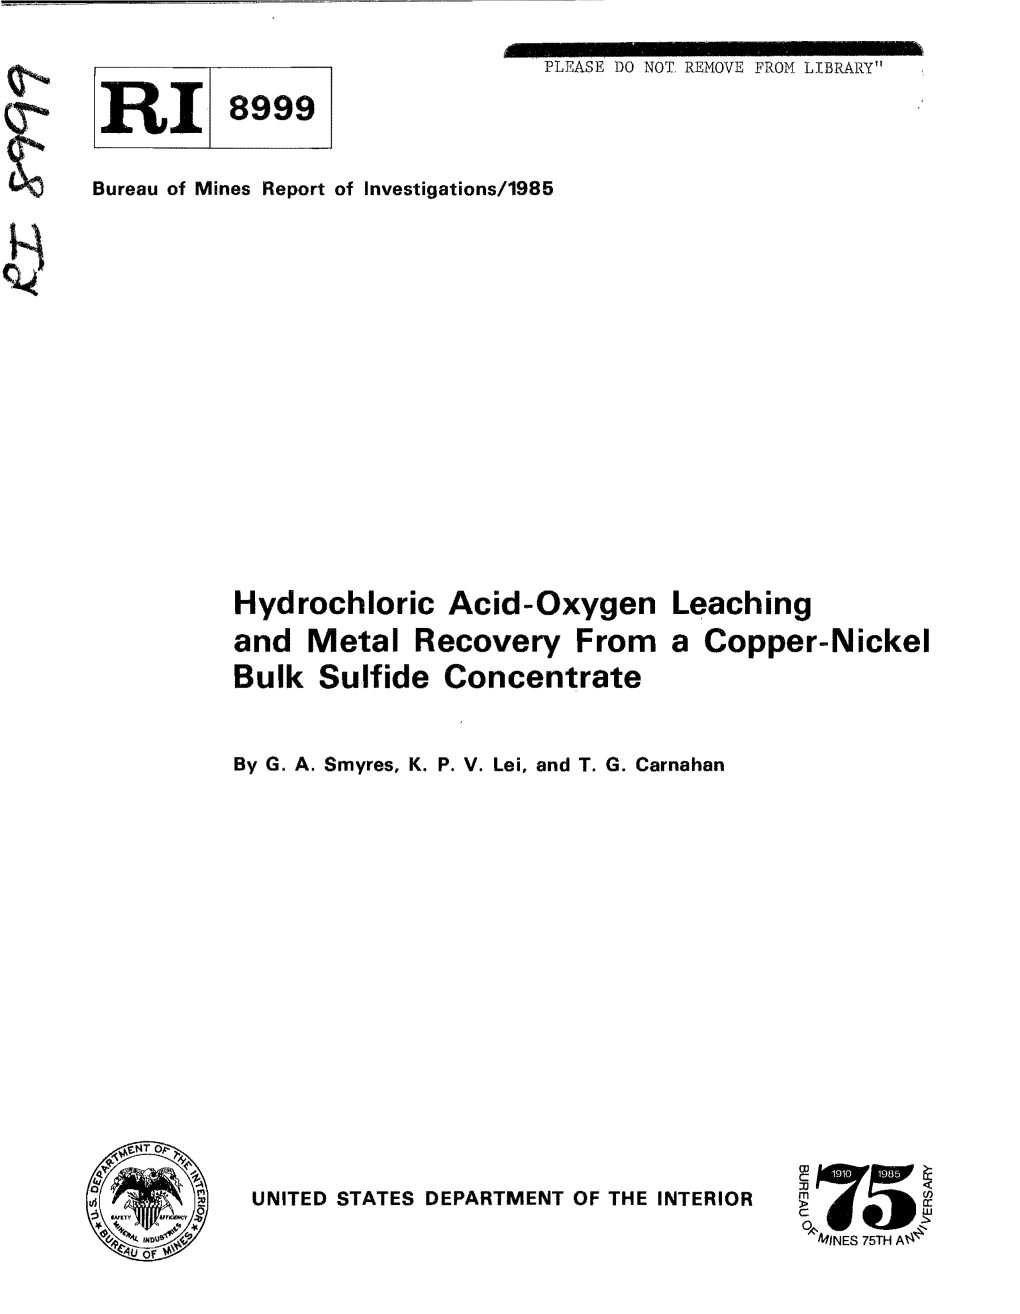 Hydrochloric Acid-Oxygen Leaching and Metal Recovery from a Copper-Nickel Bulk Sulfide Concentrate